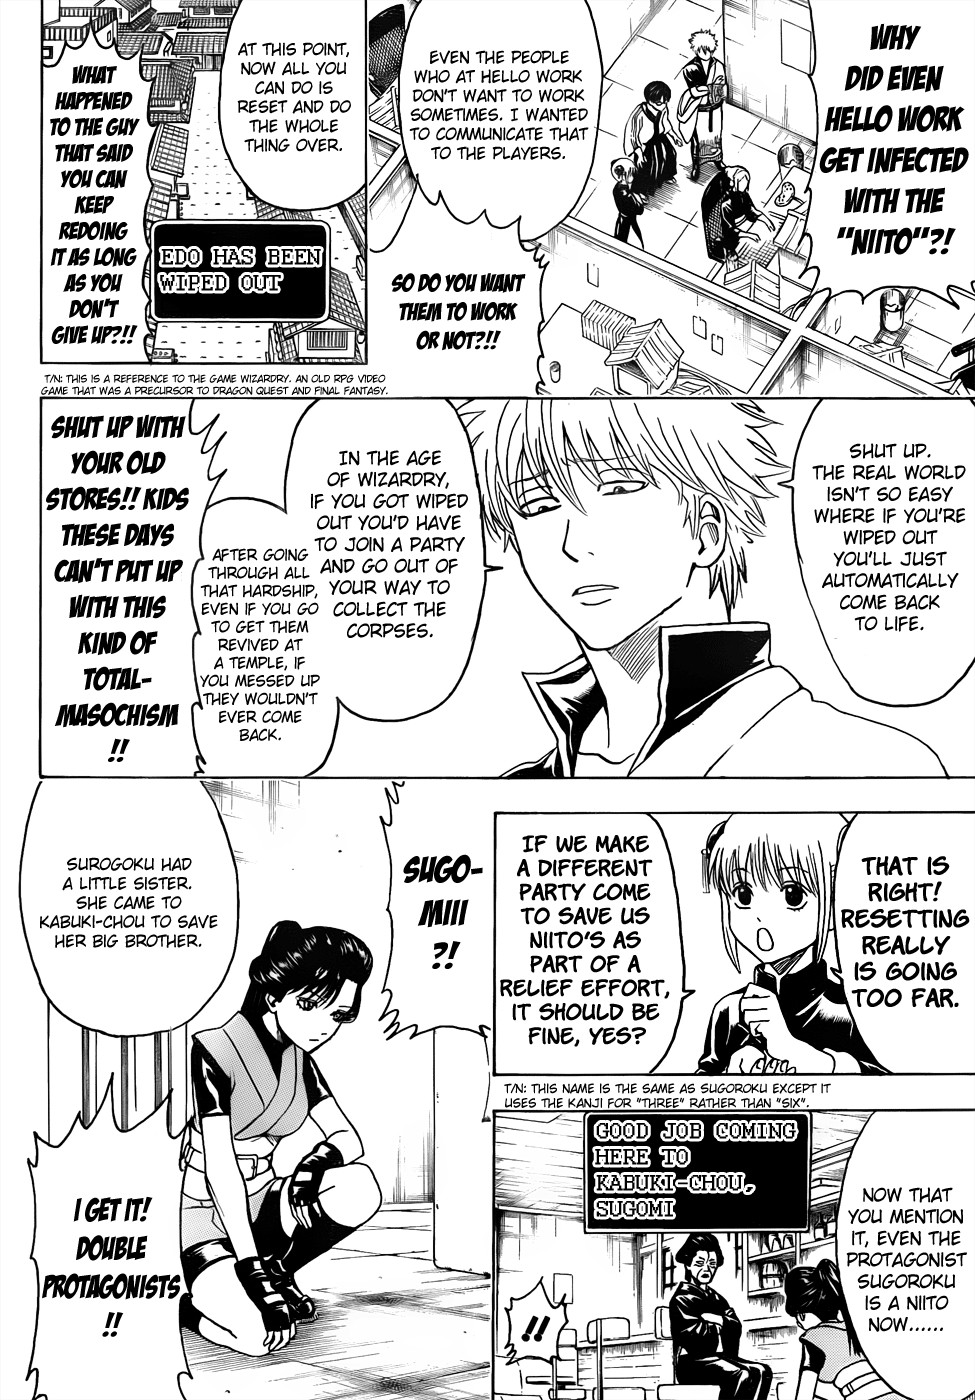 Gintama chapter 430 page 11